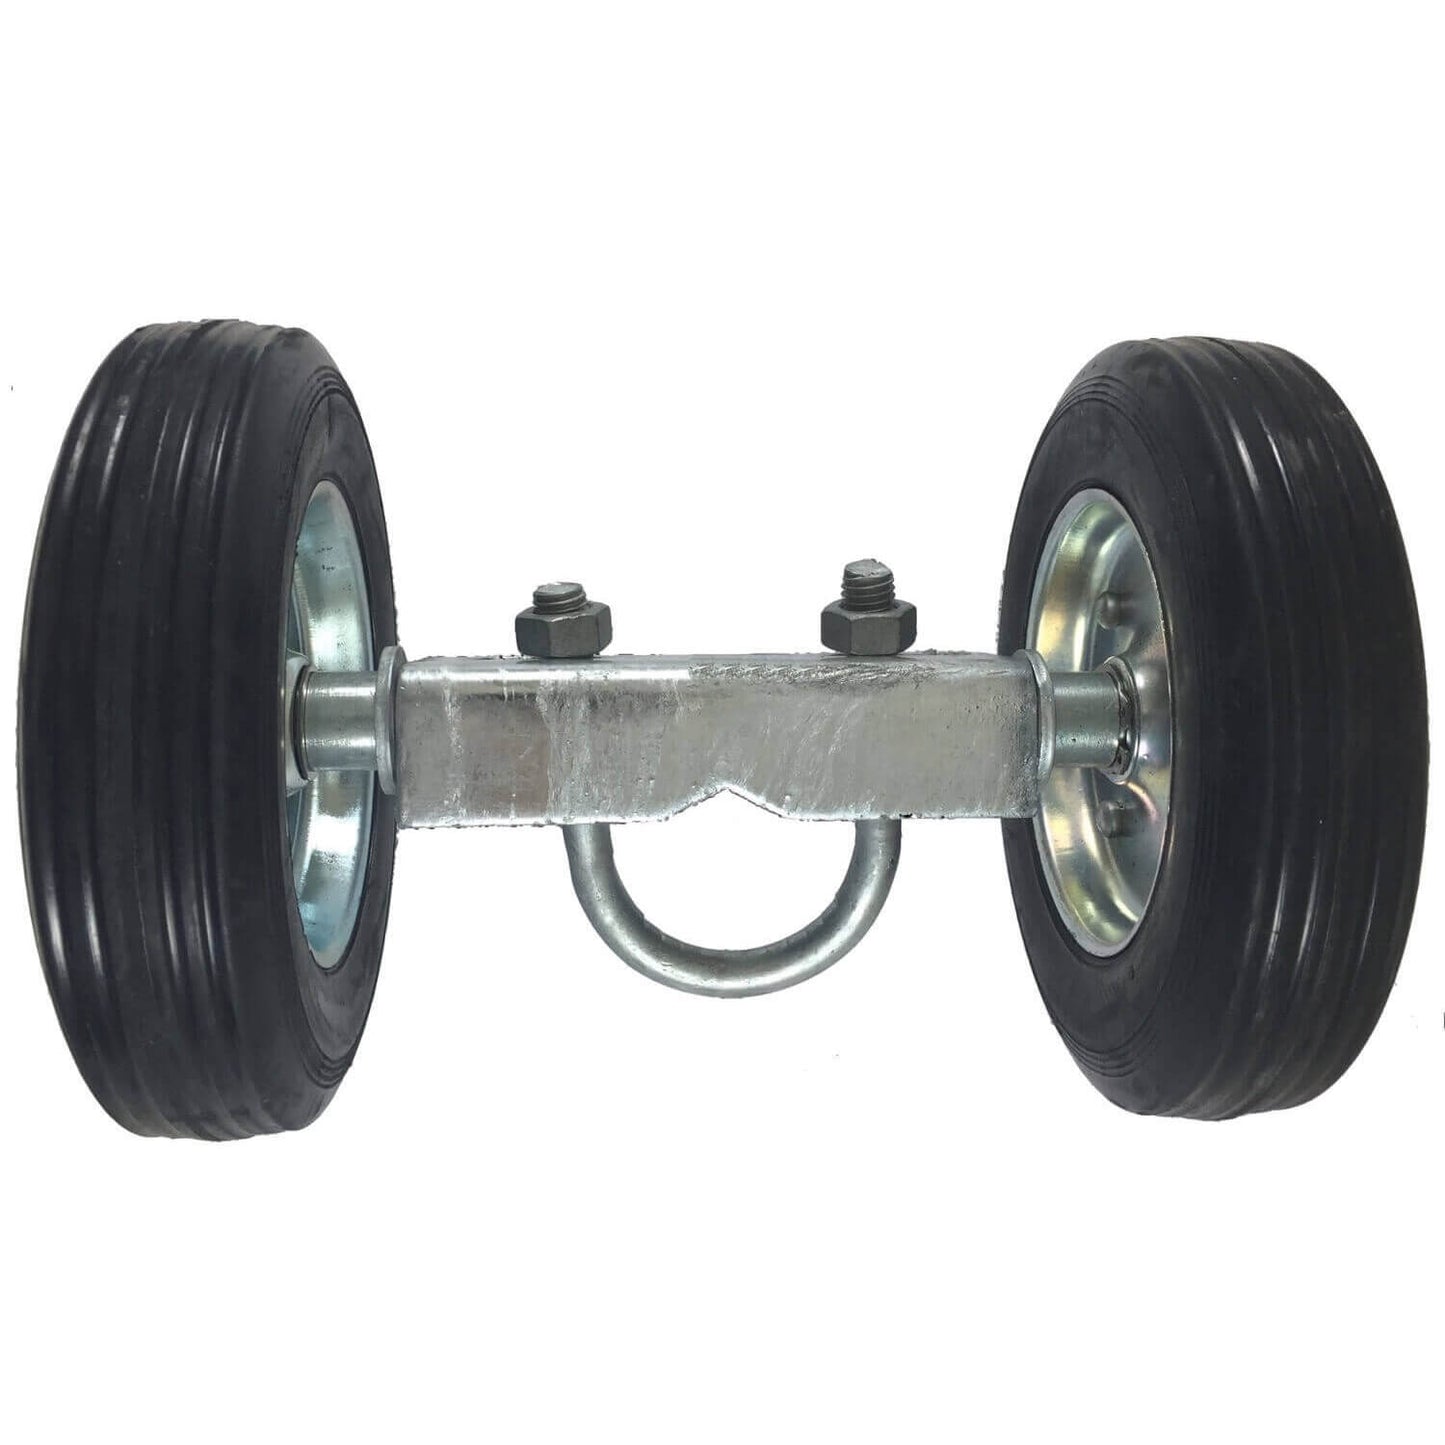 Gate Wheel Carriers for Chain Link Fence Rolling/Sliding Gates. Various Styles and Widths, Hard Rubber Wheels and Pneumatic Rubber Wheels